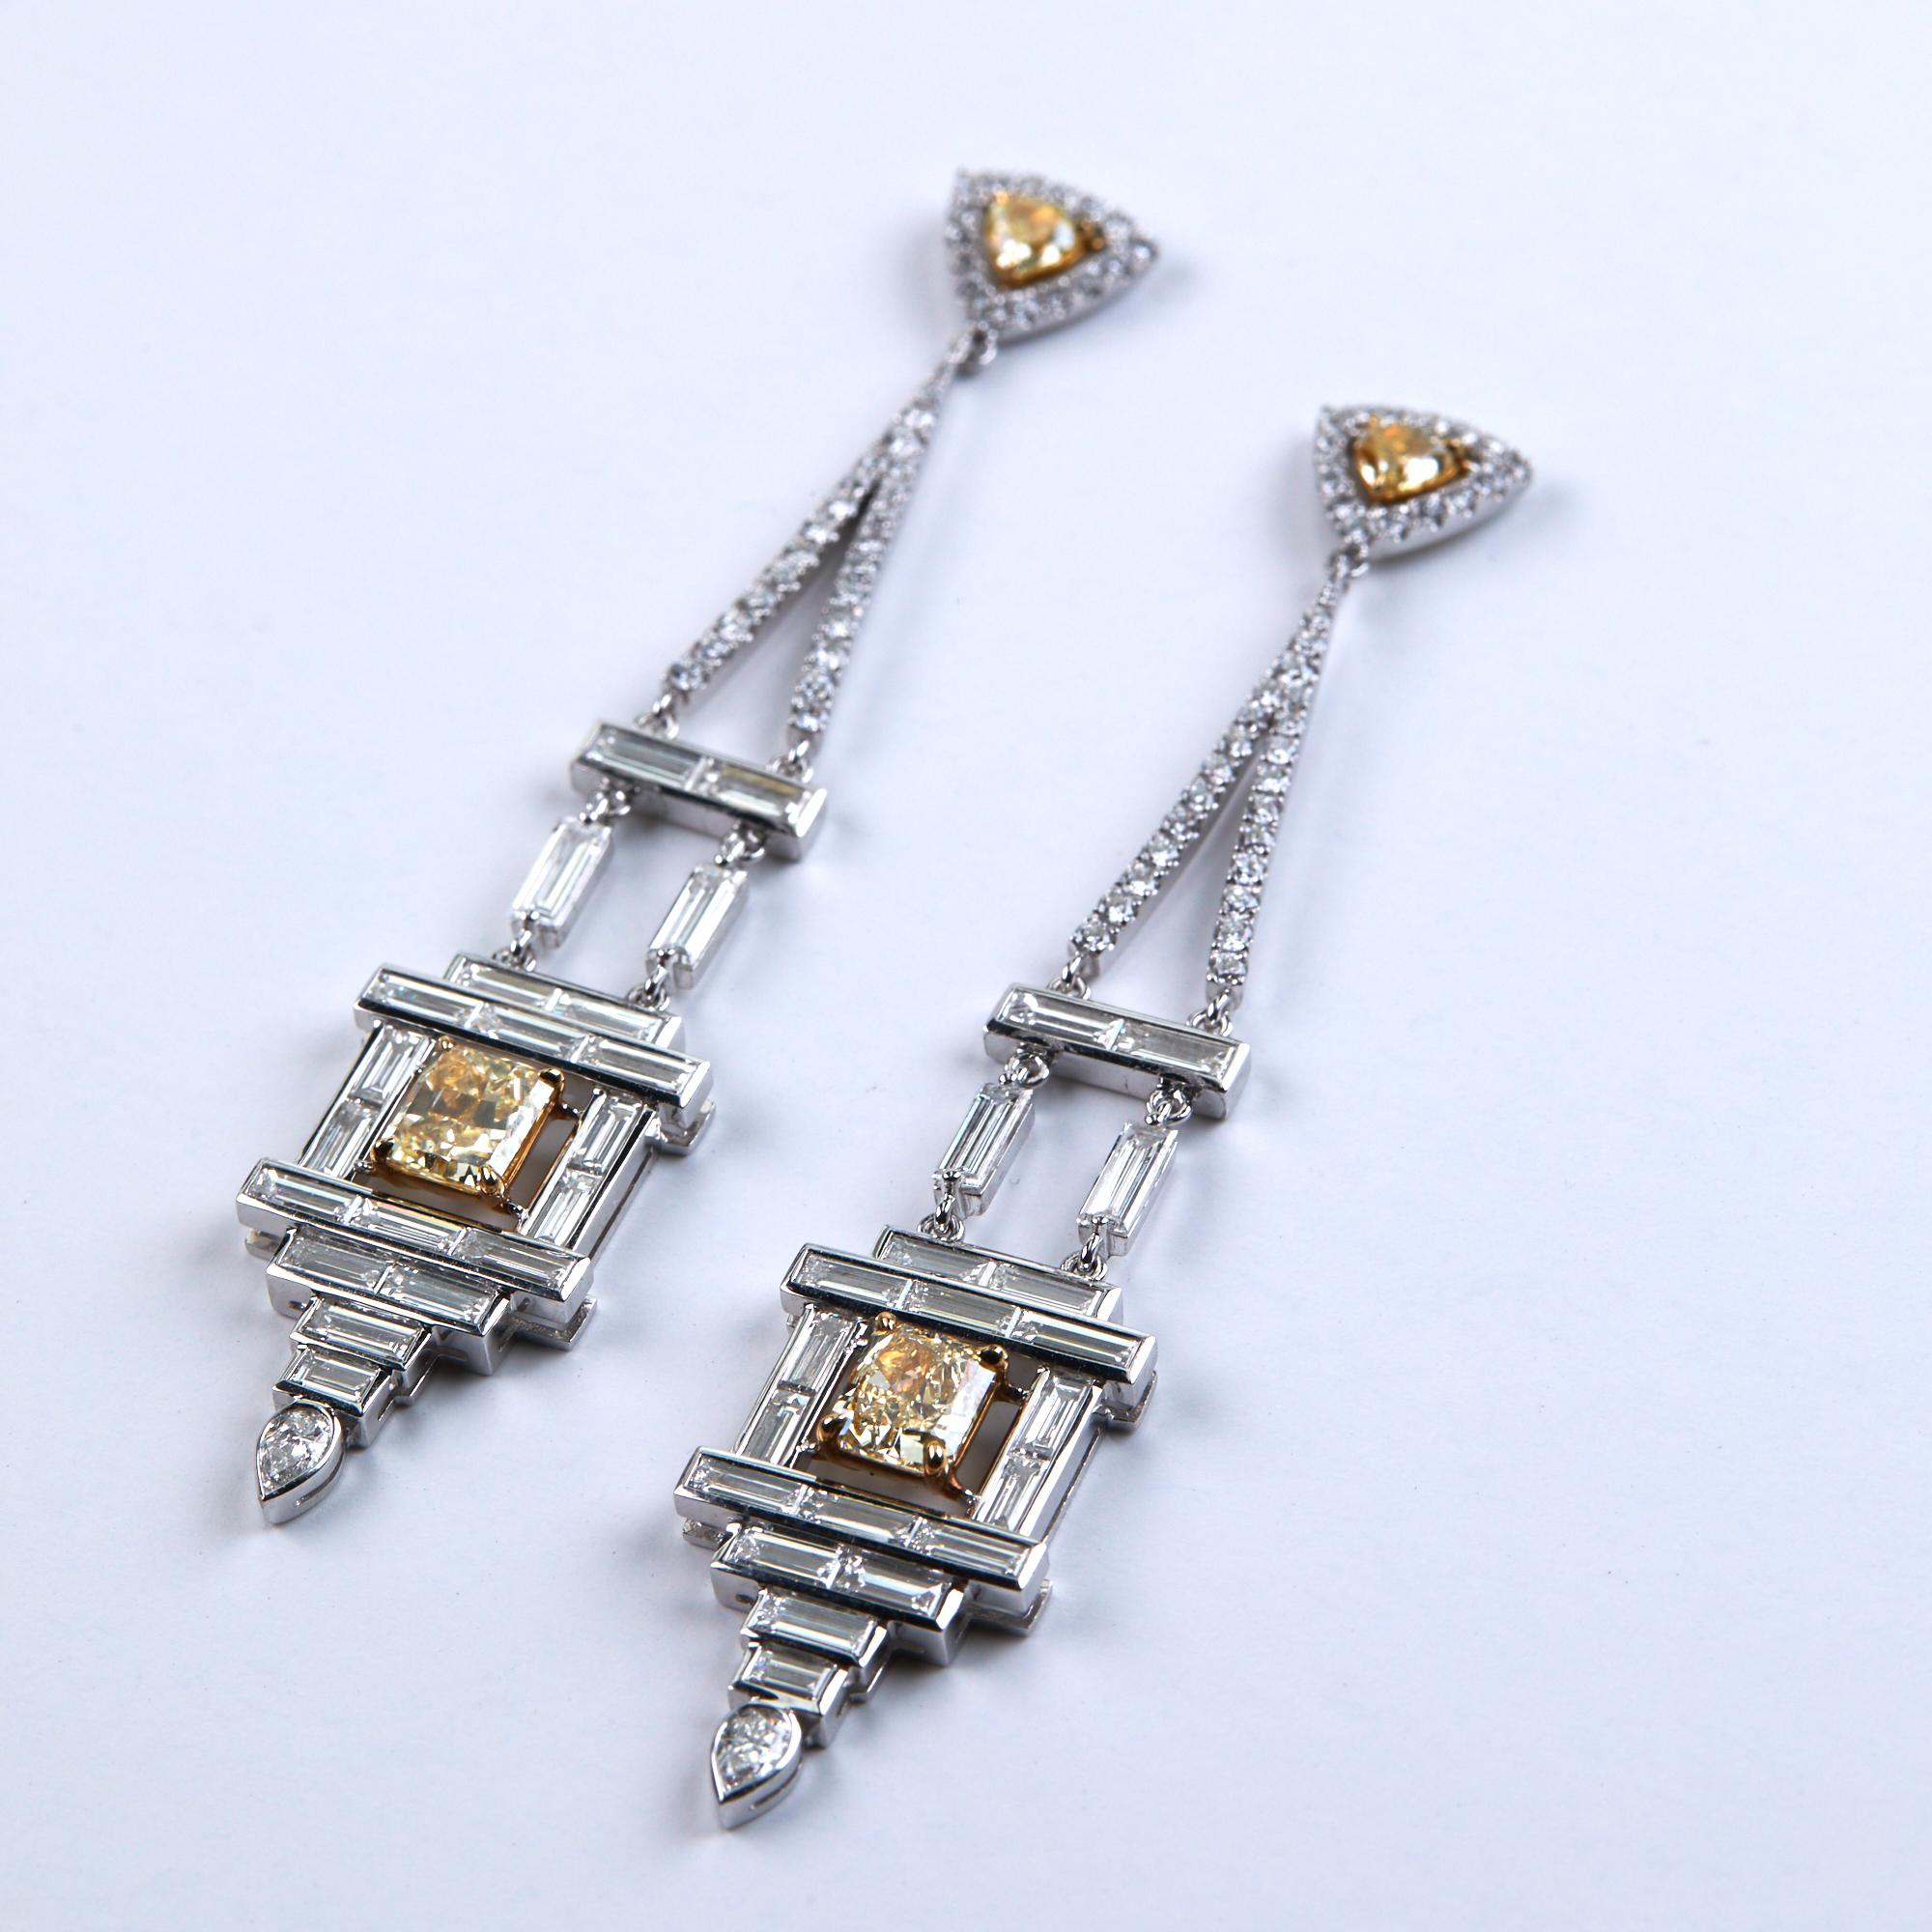 Art Deco Style Chandelier Diamond Earrings White and Yellow Gold In New Condition For Sale In Palm Desert, CA